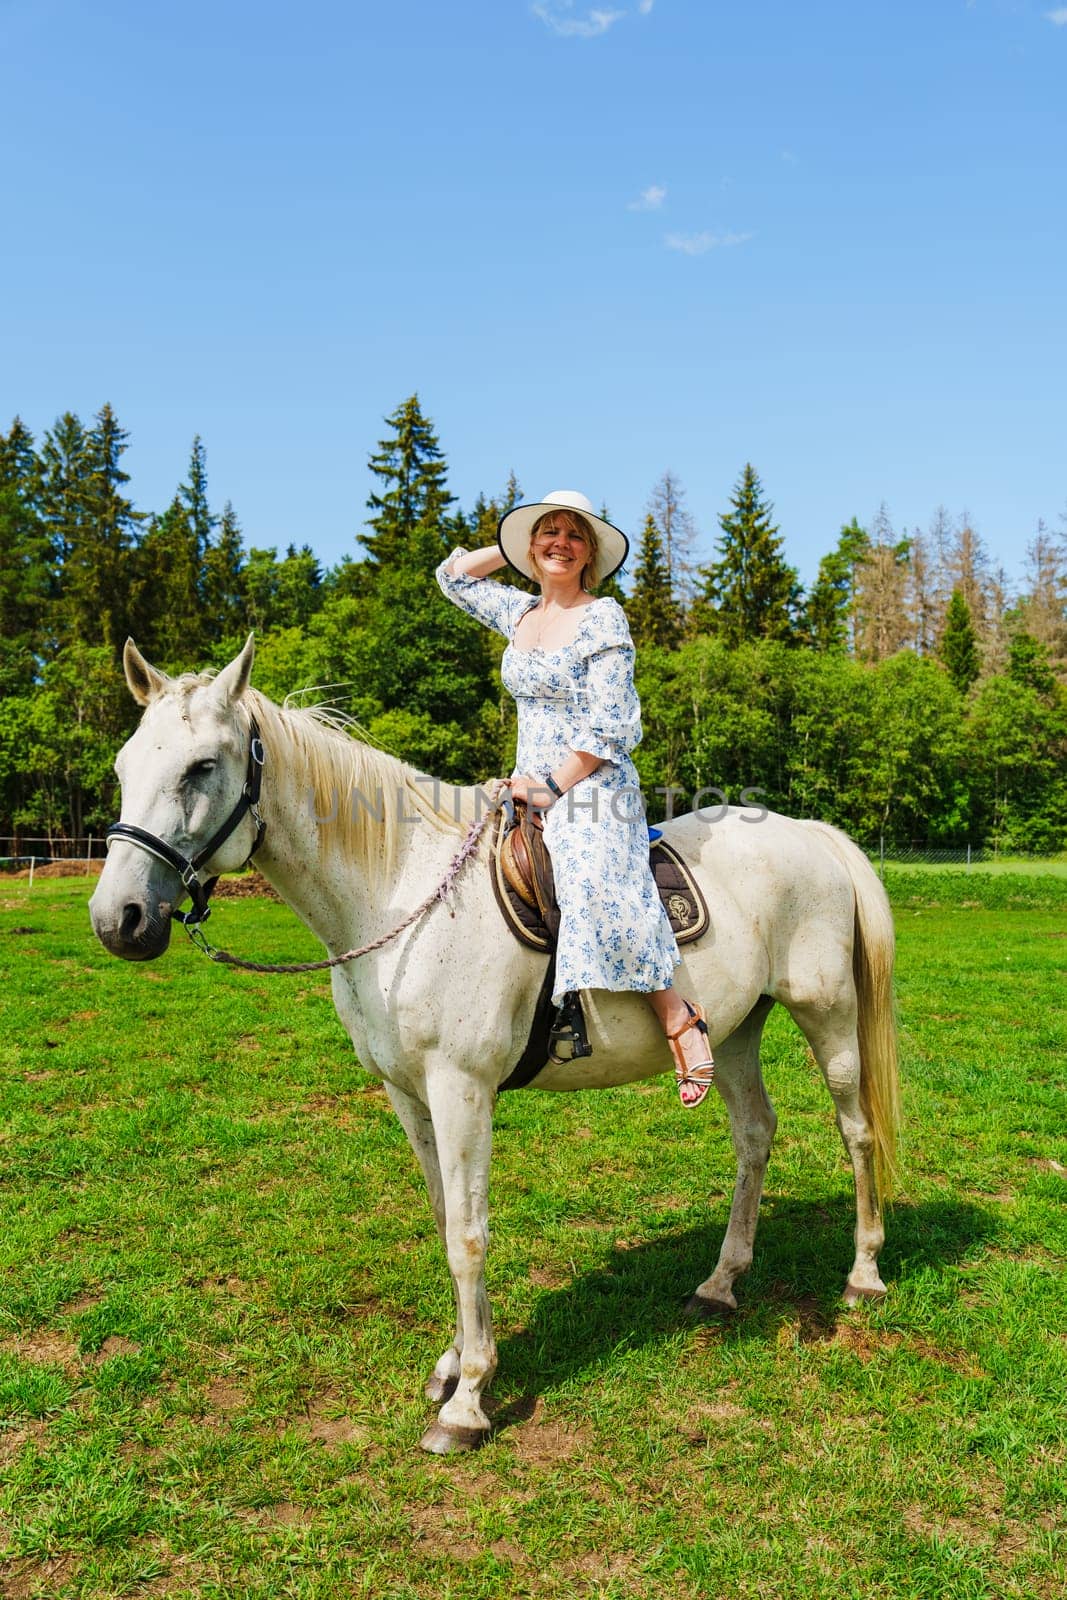 Tranquil Scene of a Woman Riding a White Horse in the Brightness of a Summer Day by PhotoTime